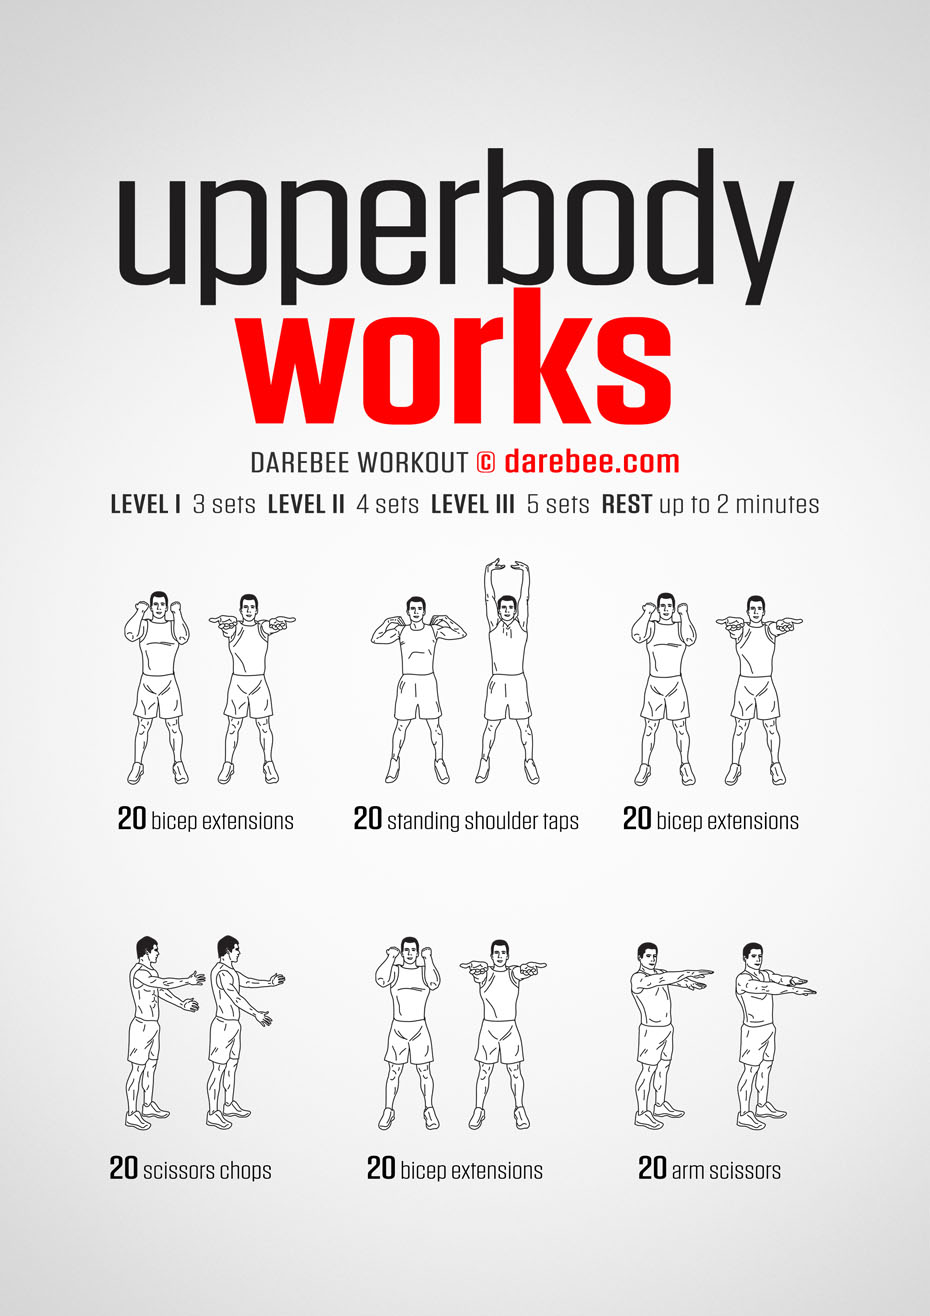 5 Day Upper Body Workout Plan 3 Days A Week for Women